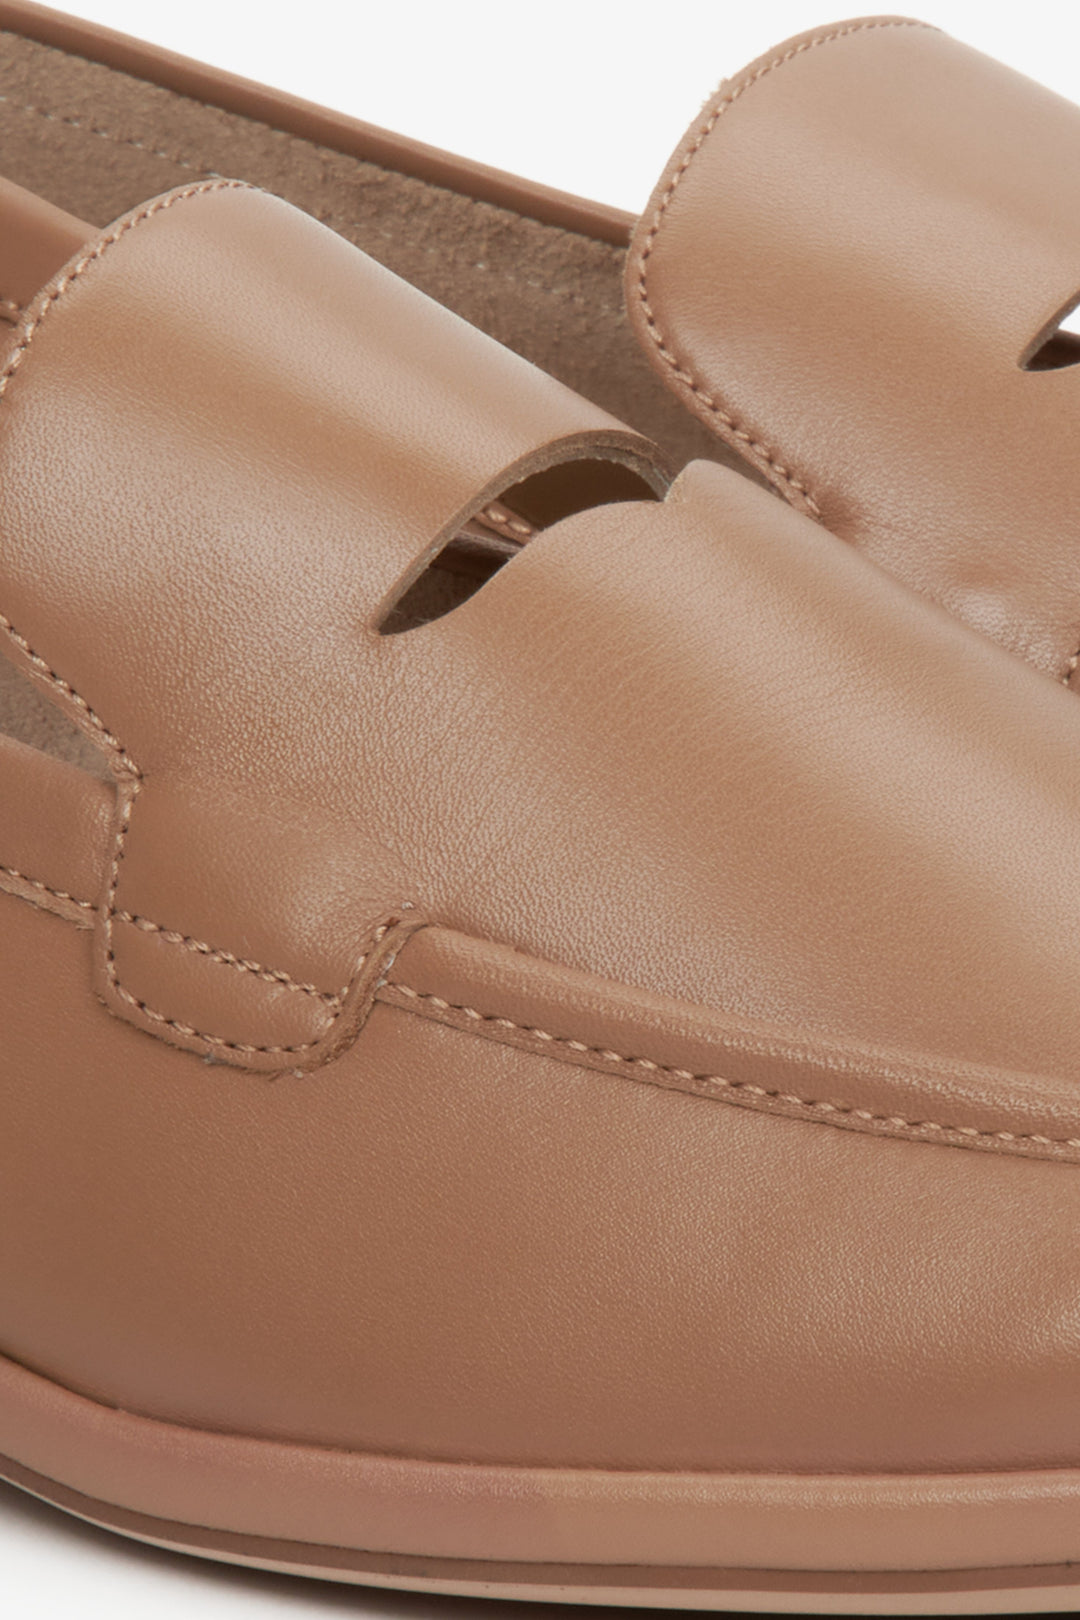 Leather, women's brown moccasins by Estro - close-up on the details.